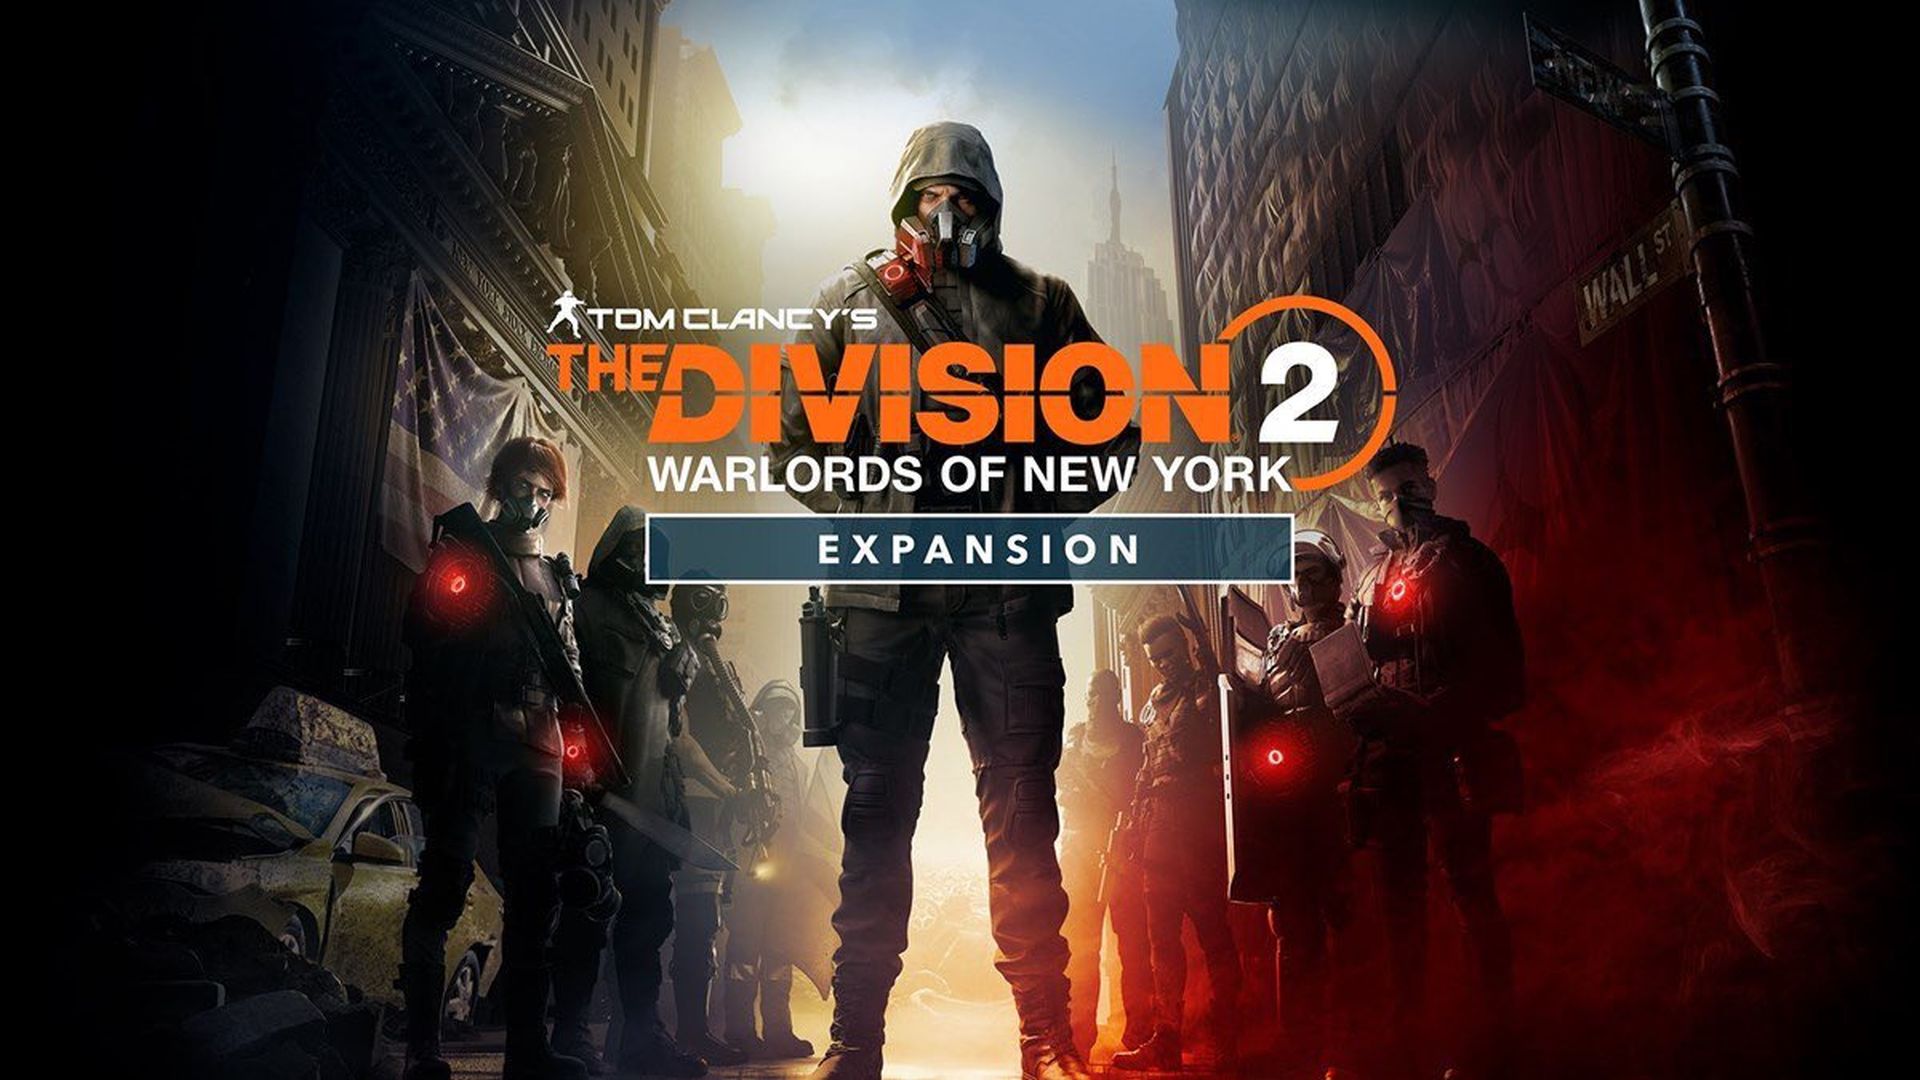 Ubisoft anuncia expansión Warlords of Newyork para The Division 2 GamersRD